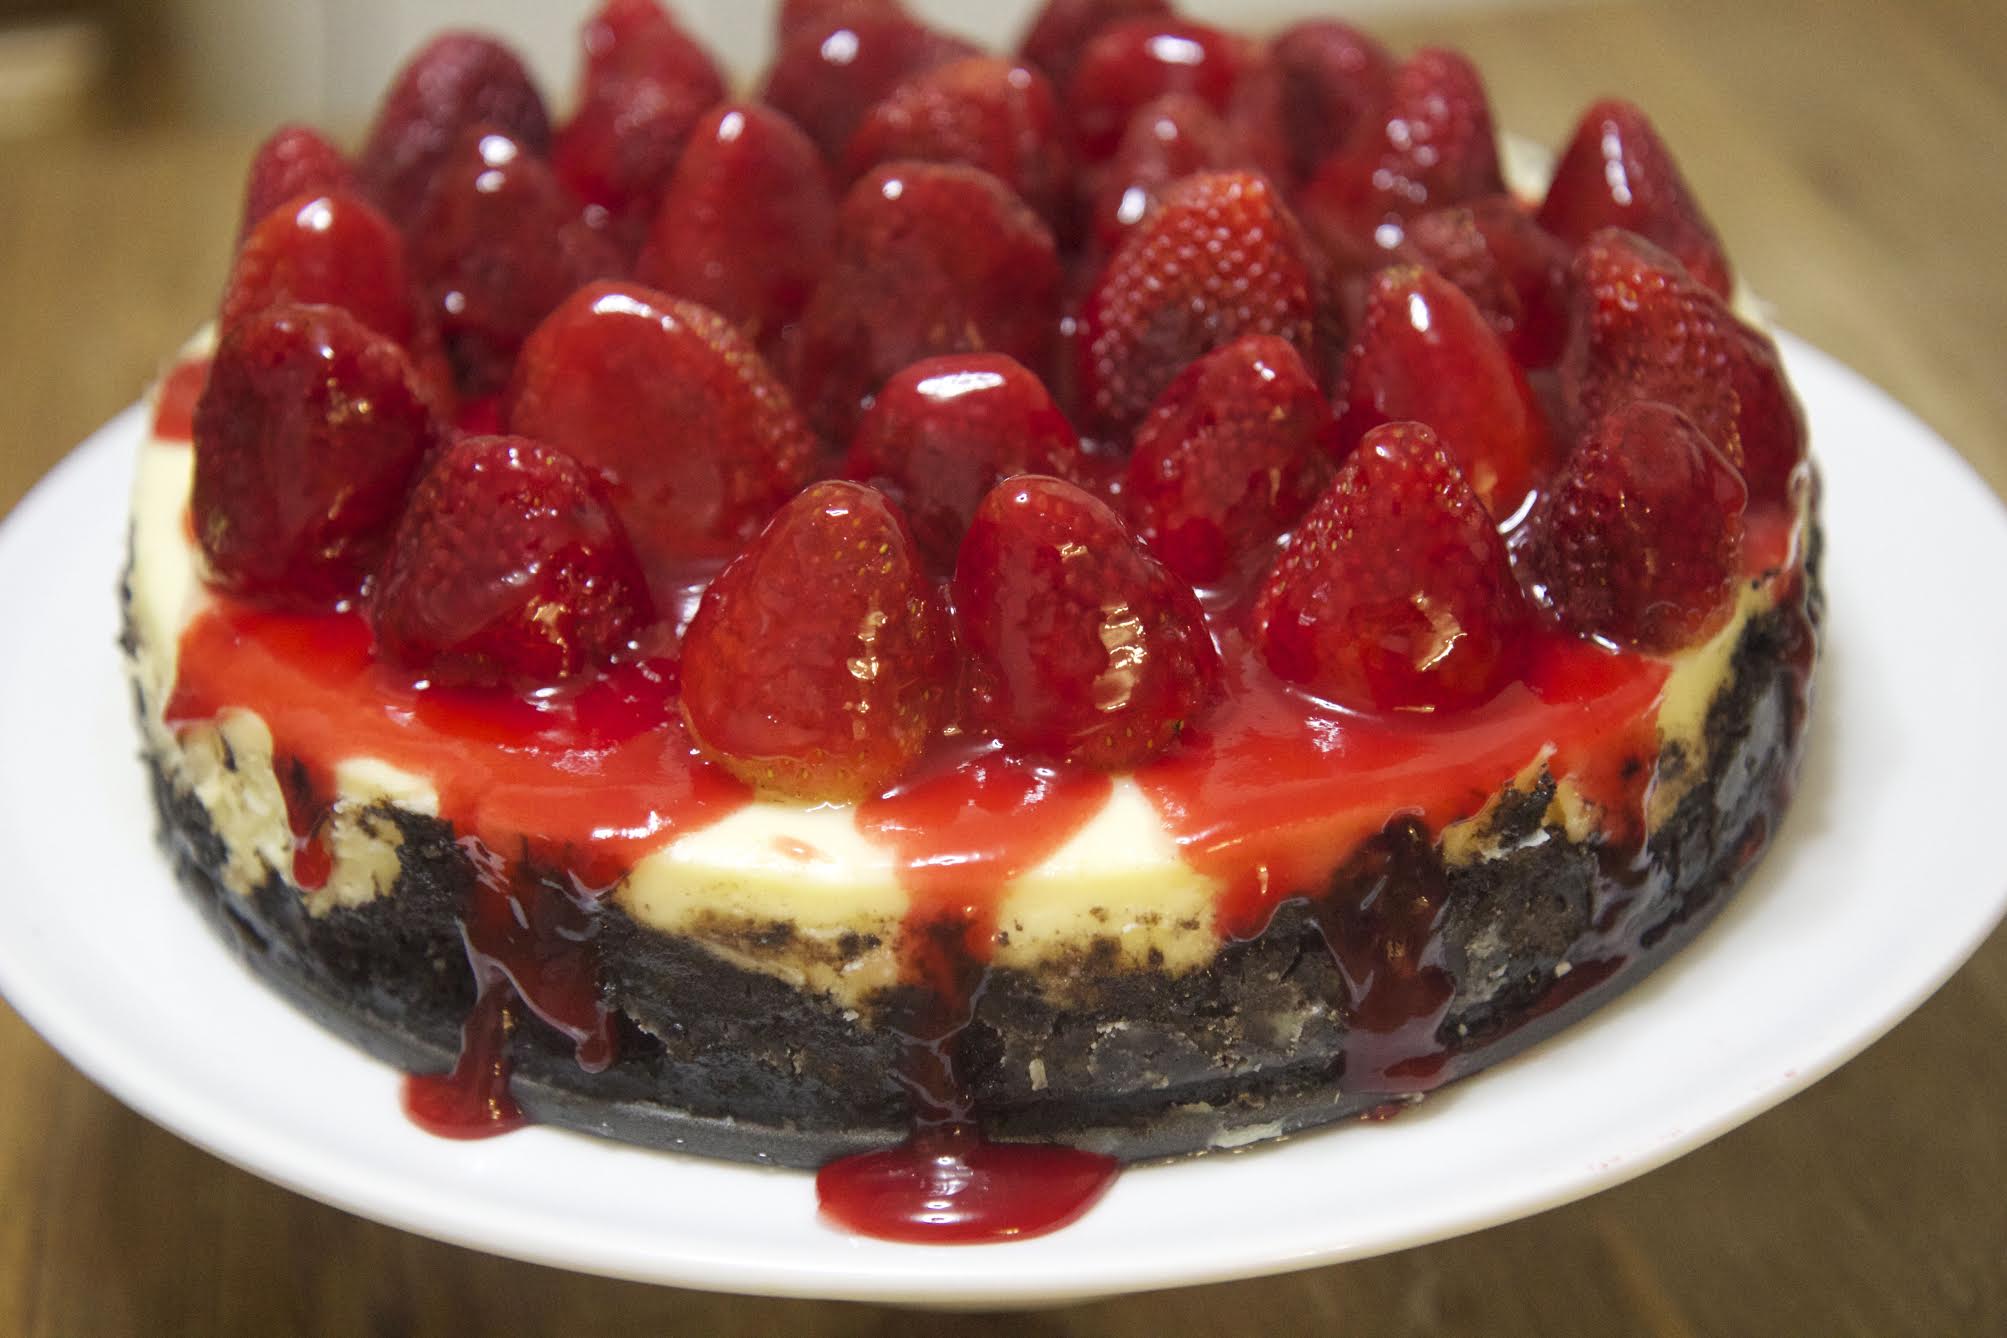 This homemade Oreo cheesecake is topped with fresh strawberries, making it the perfect dessert.